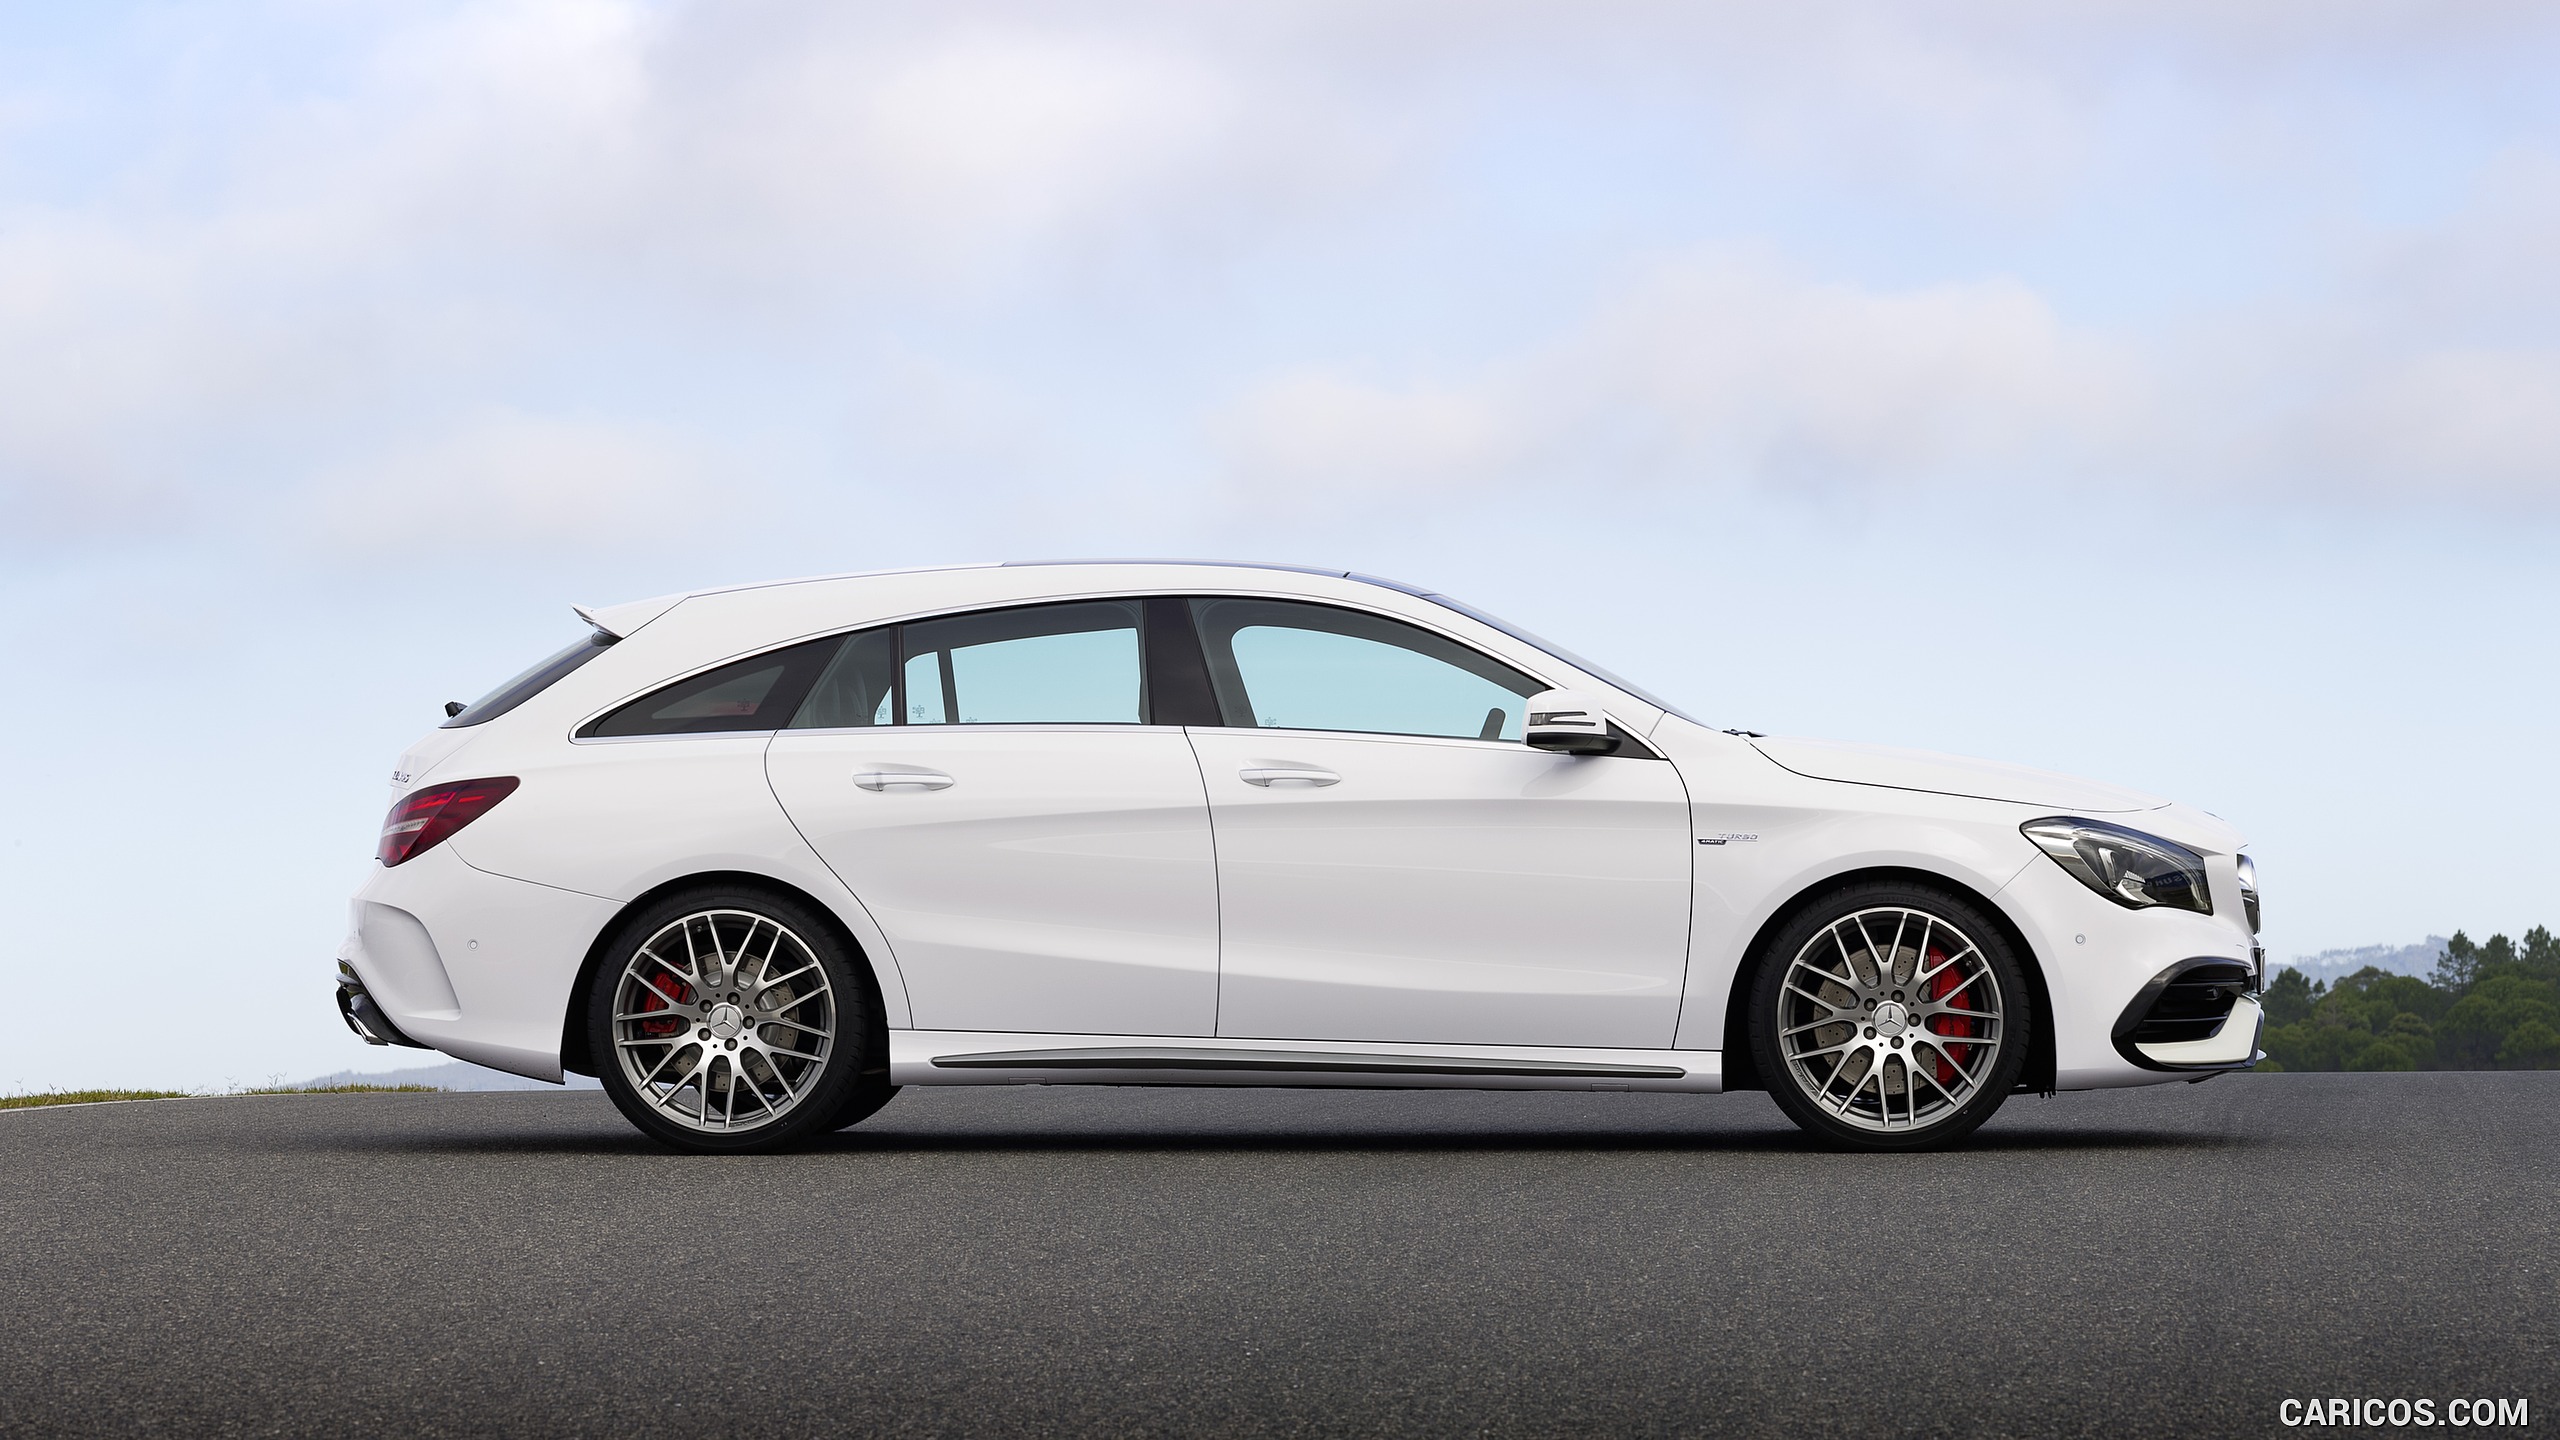 2017 Mercedes-AMG CLA 45 Shooting Brake (Chassis: X117, Color: Diamond White) - Side, #9 of 48